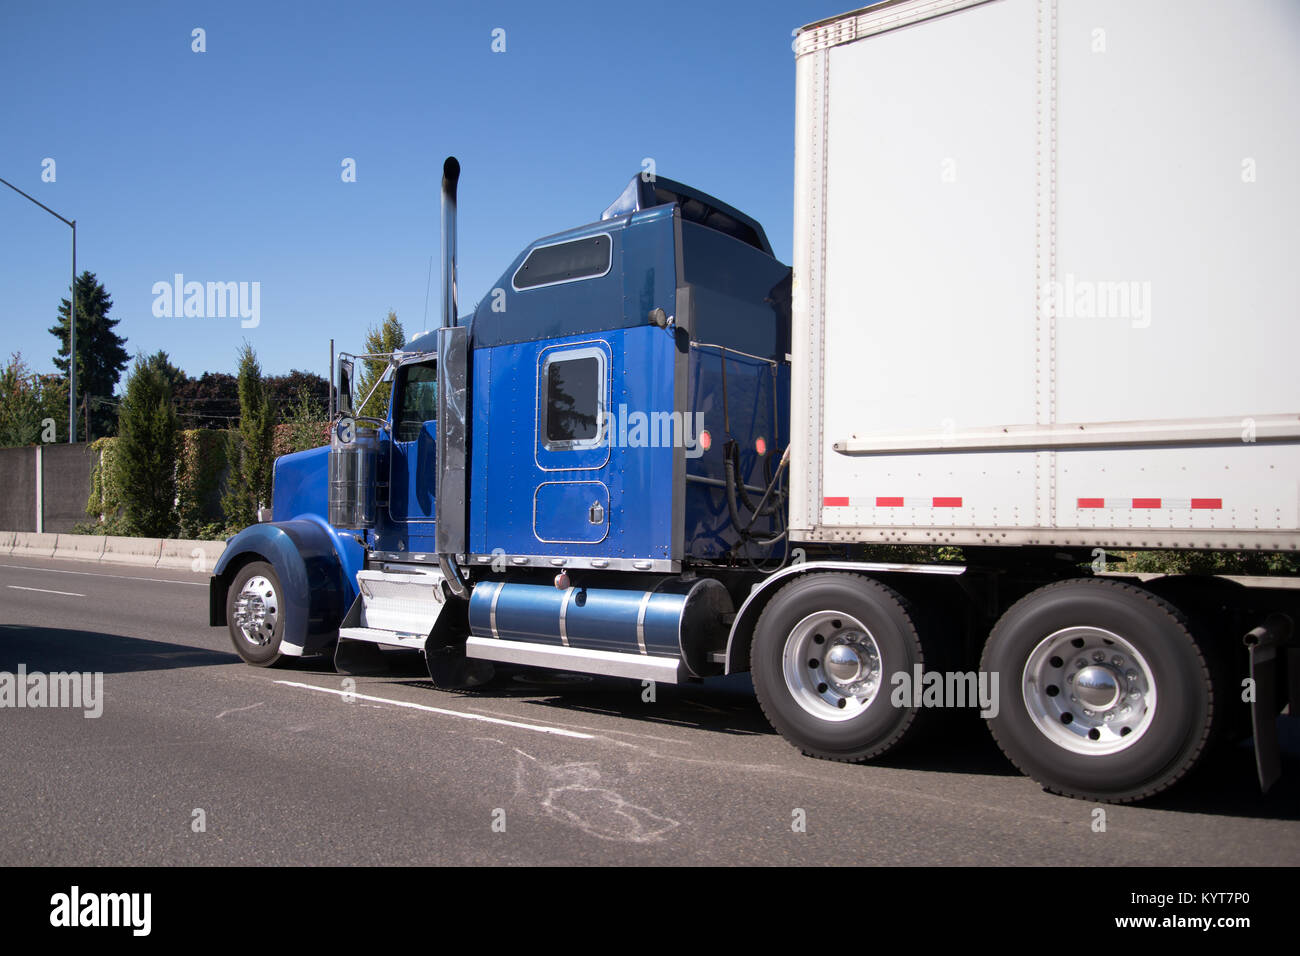 https://c8.alamy.com/comp/KYT7P0/blue-american-made-model-of-big-rig-semi-truck-with-chrome-accessories-KYT7P0.jpg